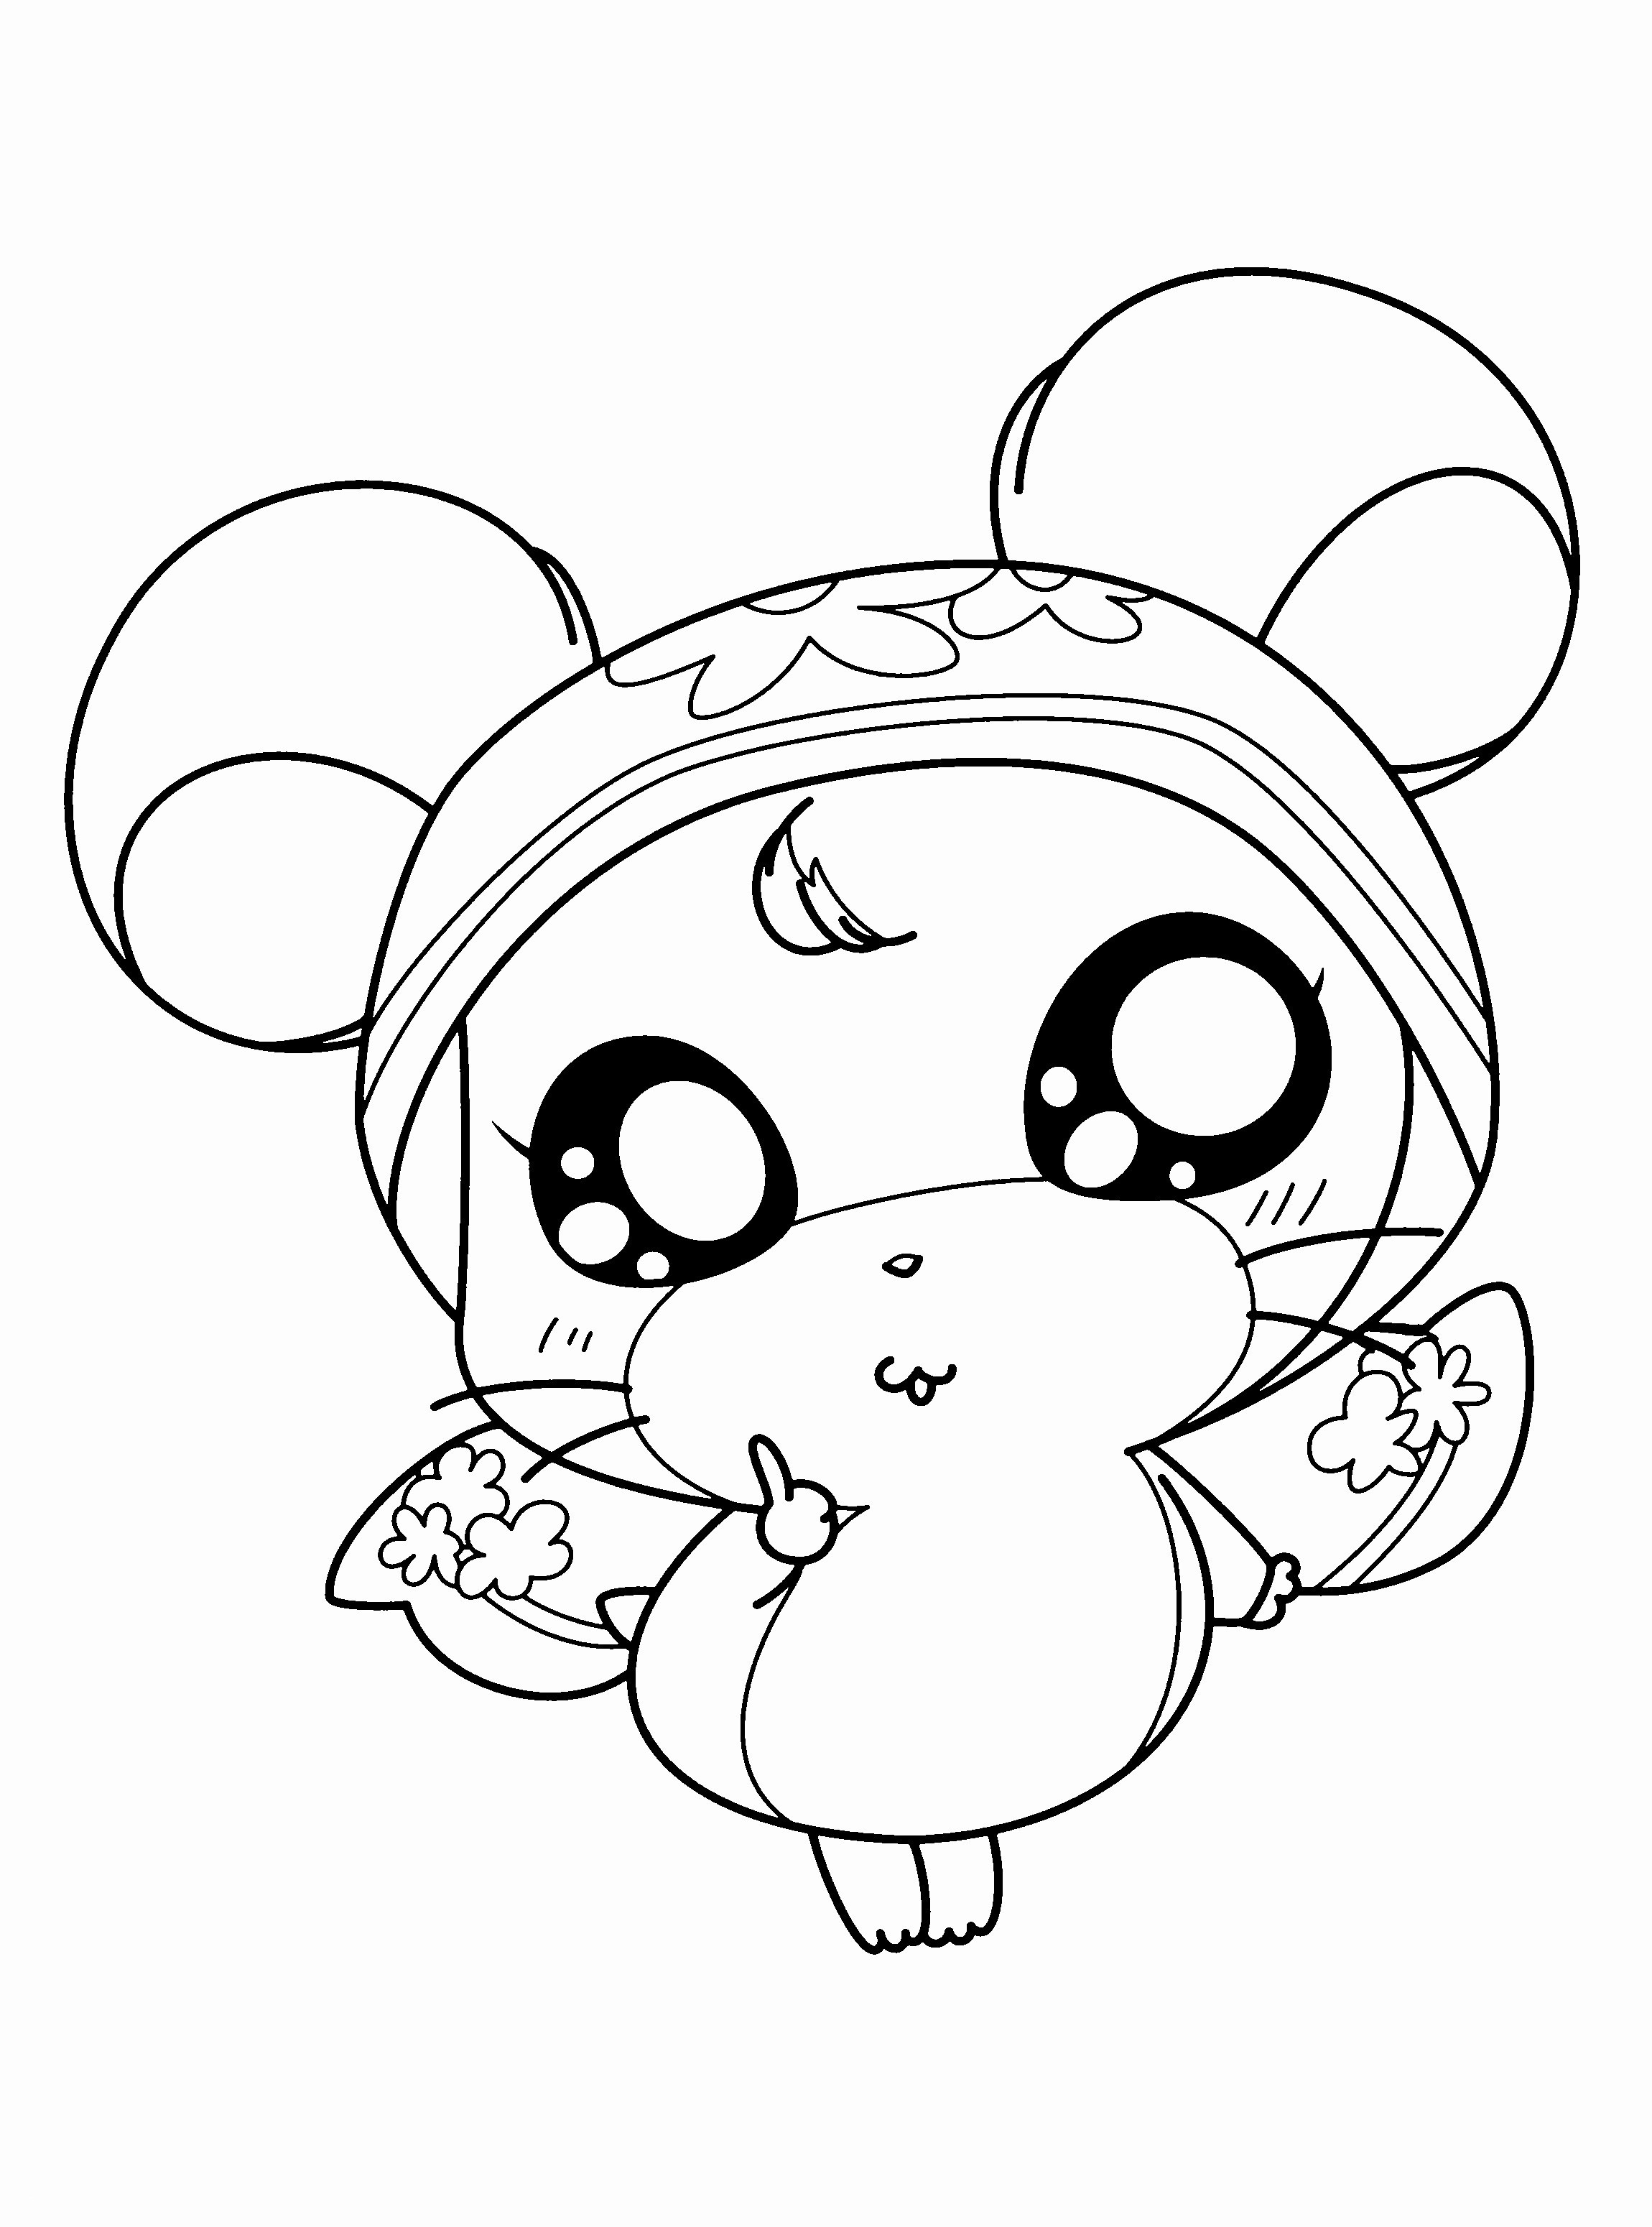 Printable Coloring Pages for Kids Animals Wallpaper